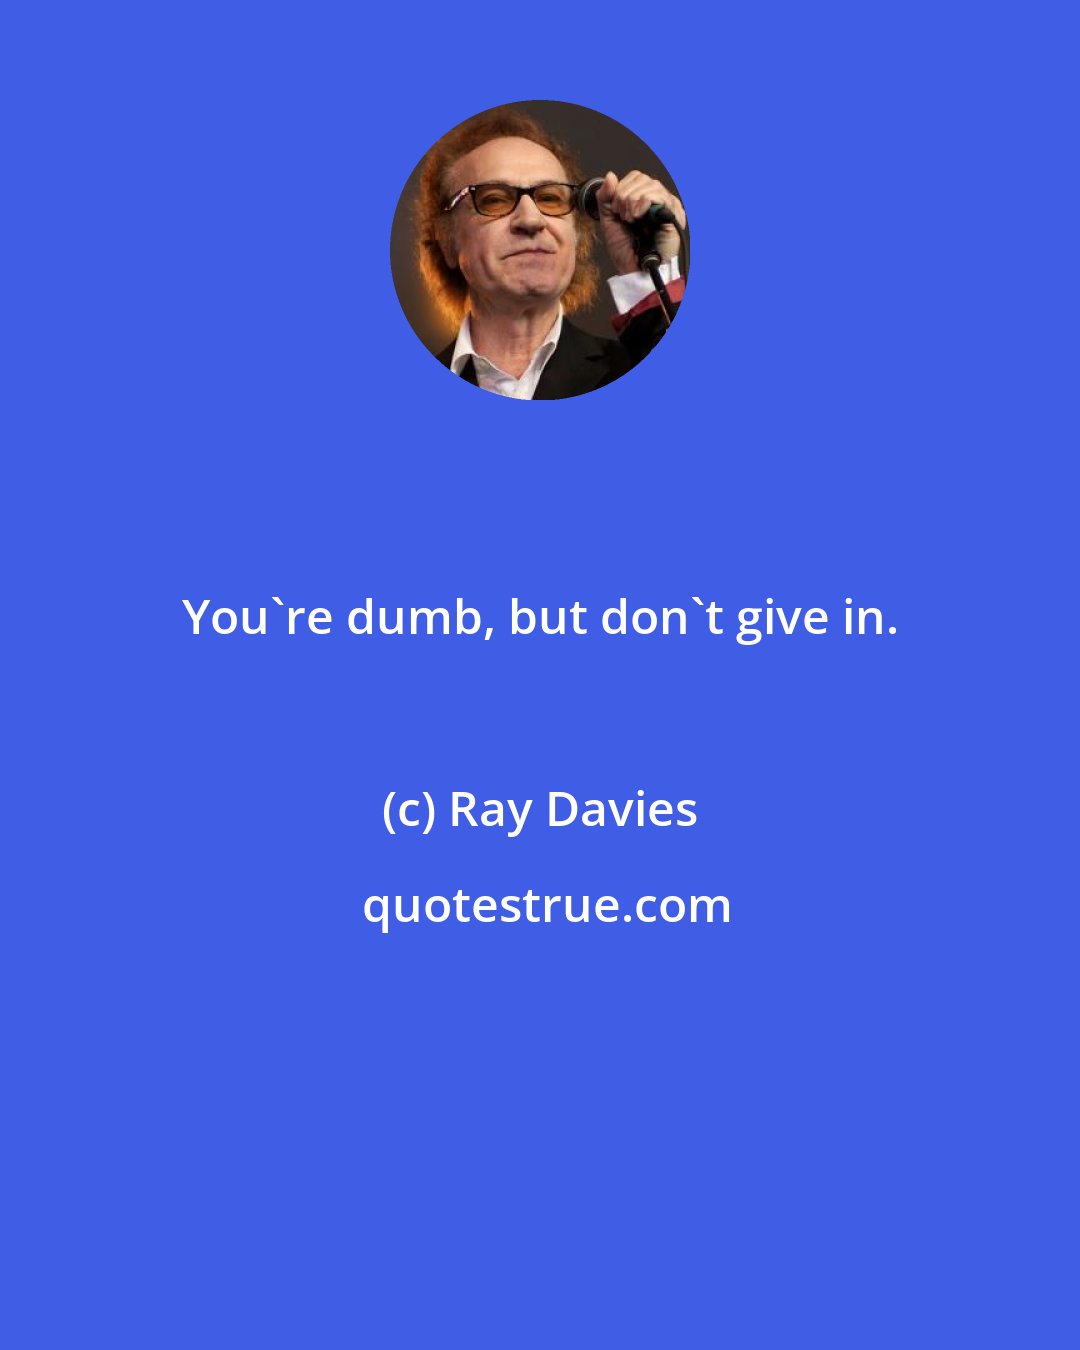 Ray Davies: You're dumb, but don't give in.